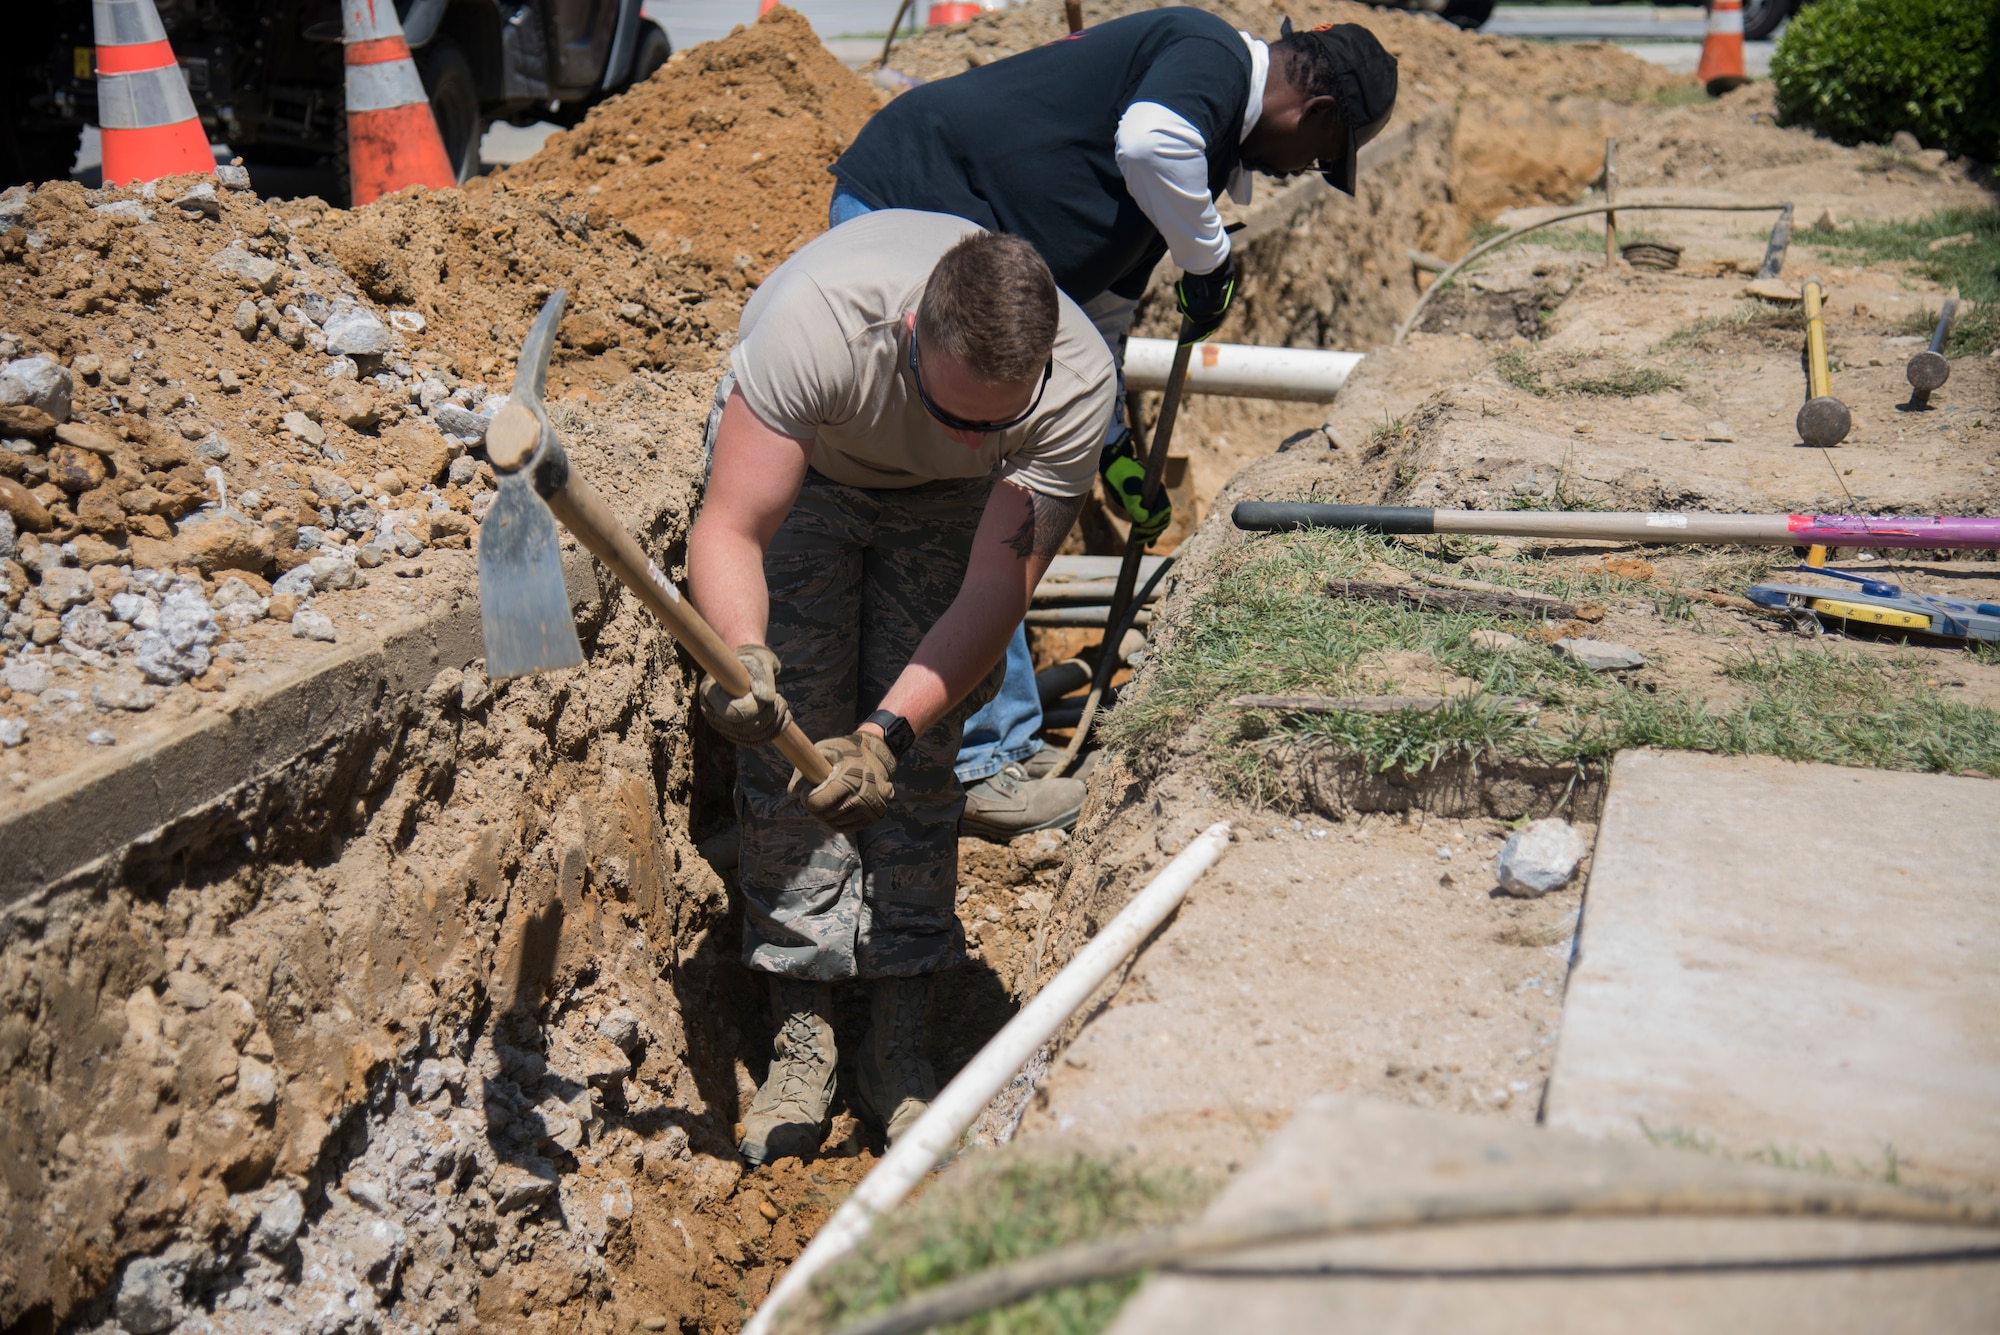 Airman 1st Class Keifer Donovan, 436th Civil
Engineer Squadron pavement and equipment
apprentice, swings a pickaxe to break up rocks
and dirt June 3, 2019, at Dover Air Force Base,
Del. The trench is being created in order to
install a French drain, which is a perforated
pipe that will divert water away from the main
gate entry control point building. (U.S. Air Force
photo by Airman 1st Class Jonathan Harding)